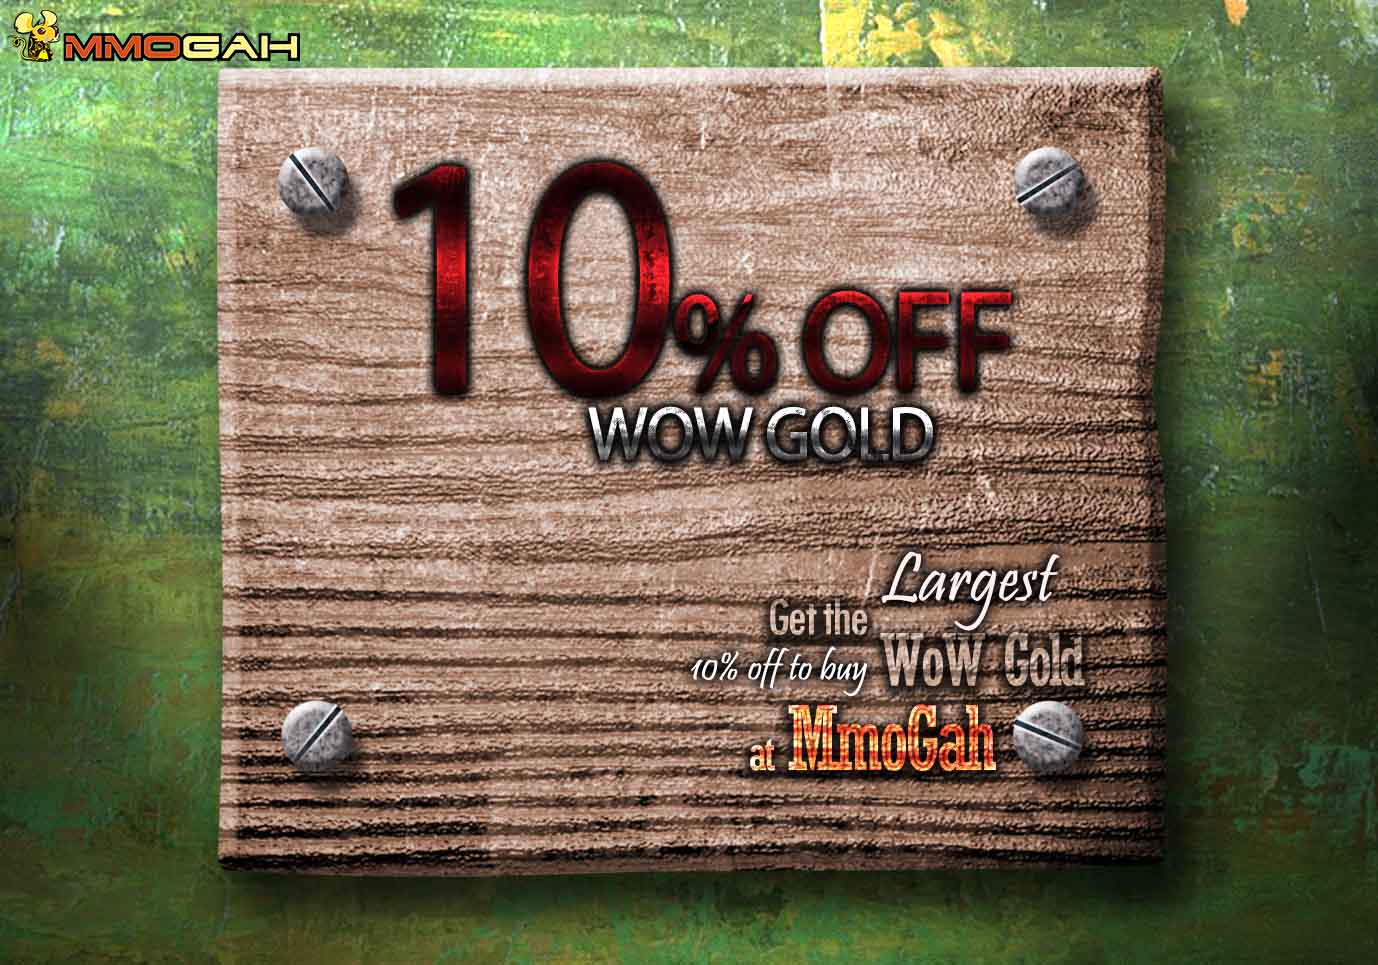 wow gold 10% off